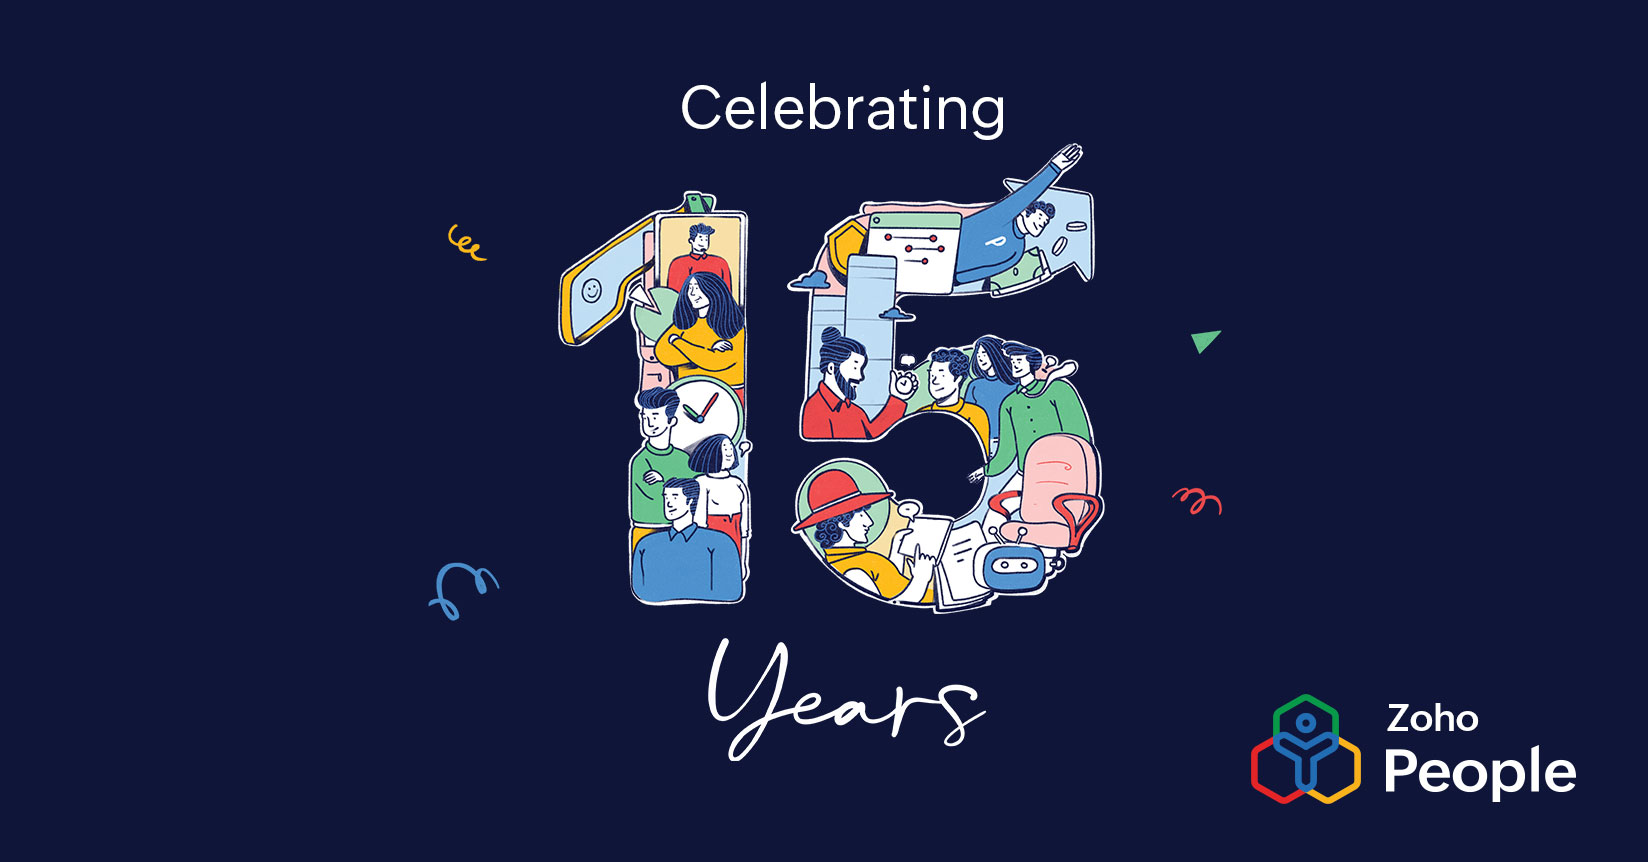 Celebrating 15 years of fostering human connections